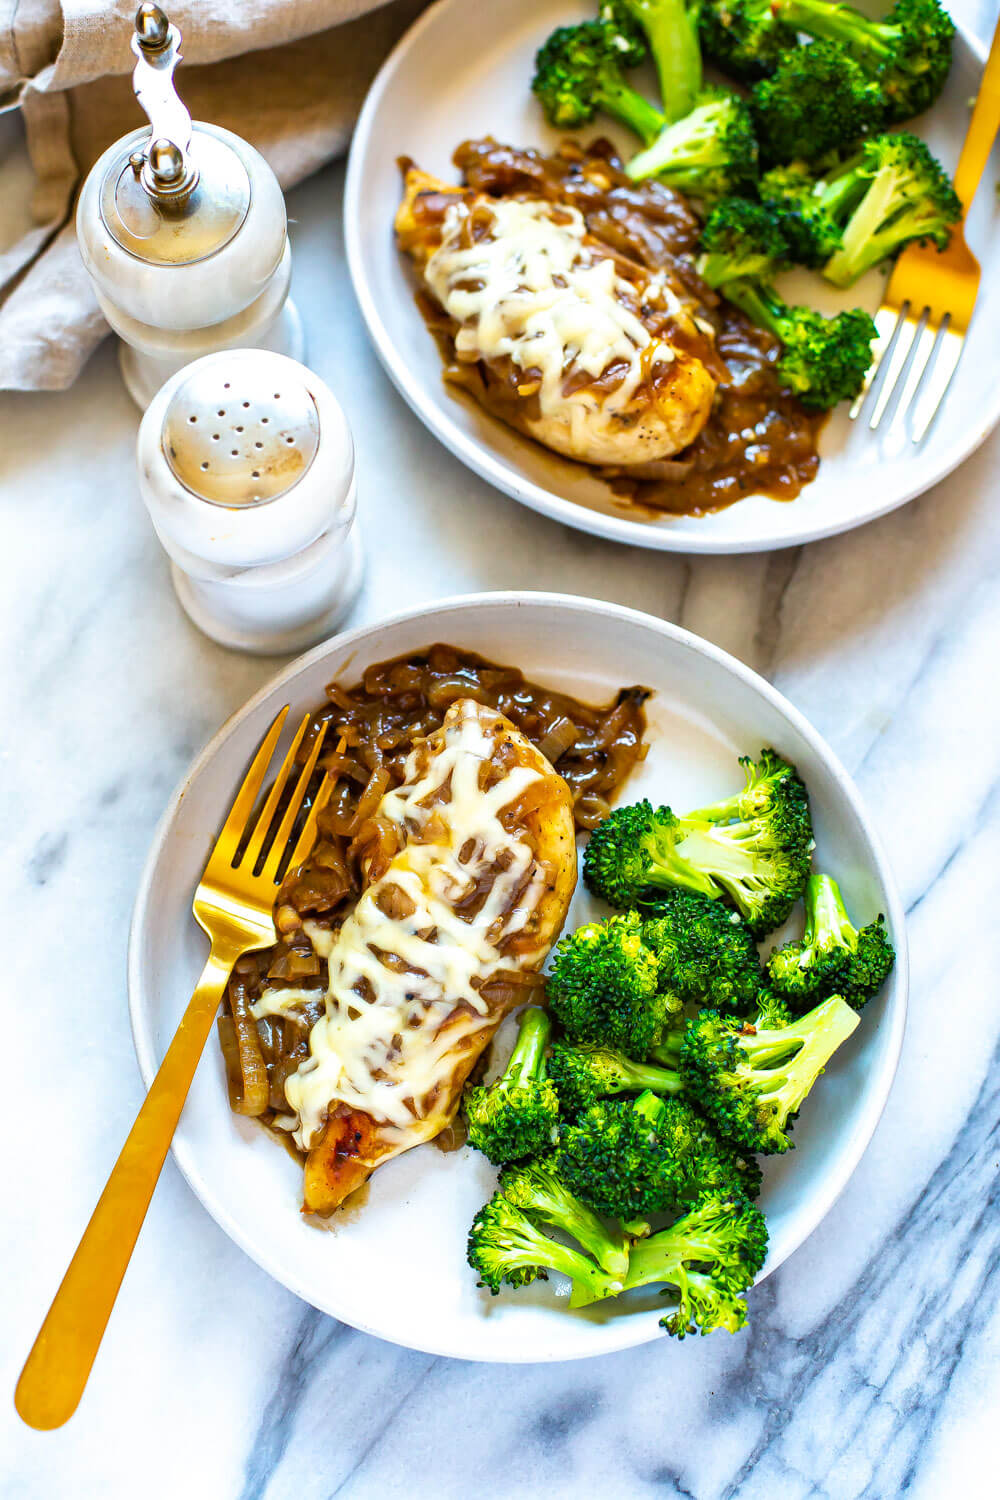 This French Onion Chicken Skillet is a delicious weeknight dinner that is a play on French onion soup and packed with protein, making it a full meal